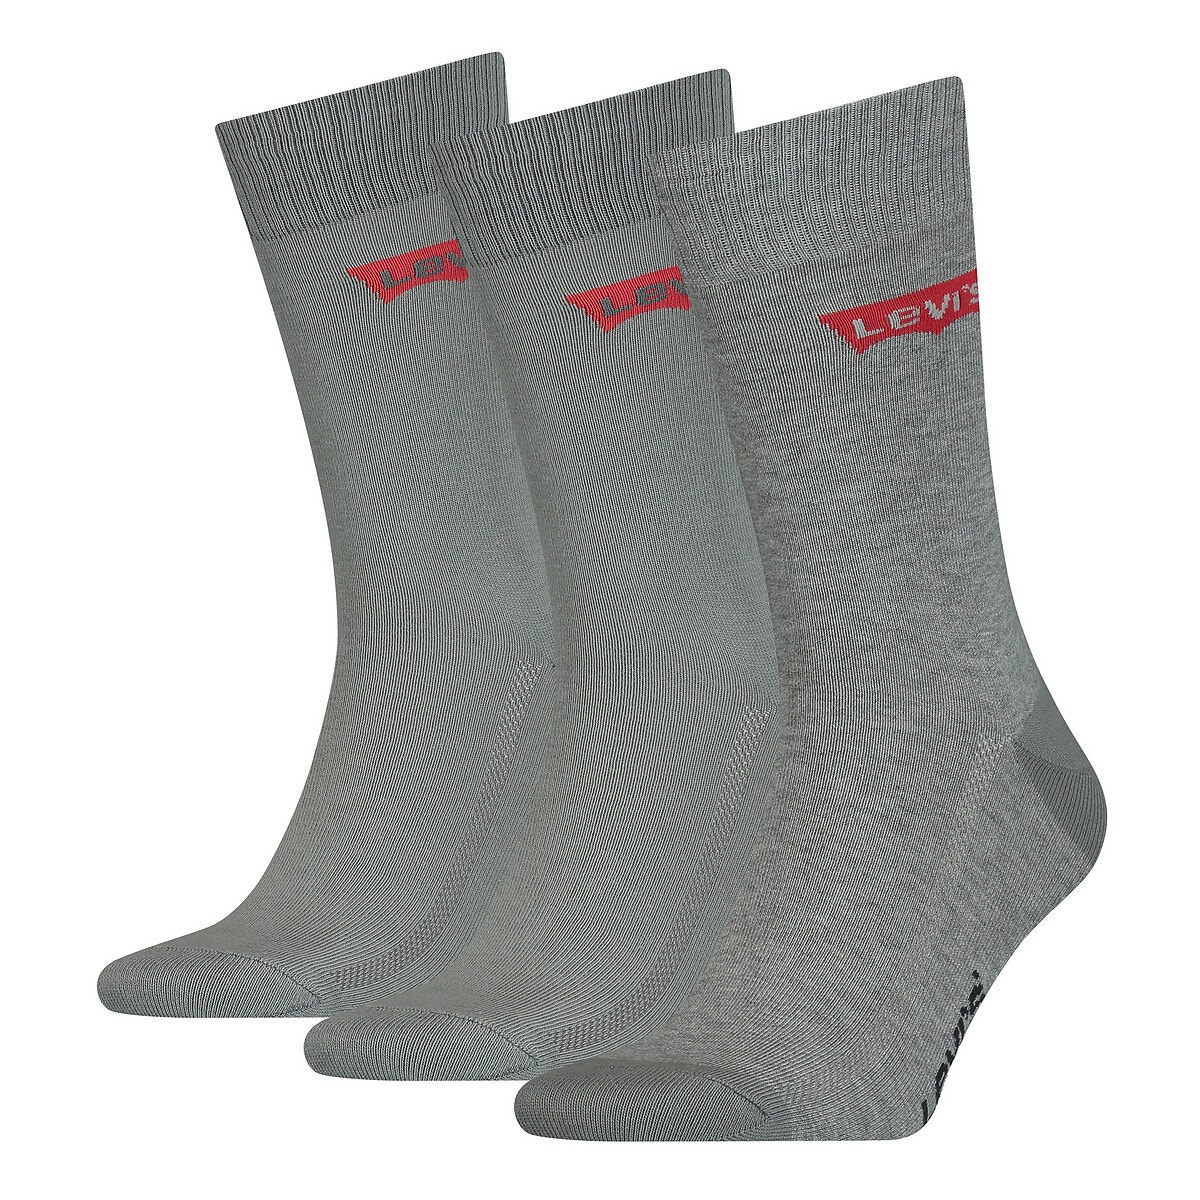 Pack of 3 Pairs of Ankle-High Socks in Cotton Mix